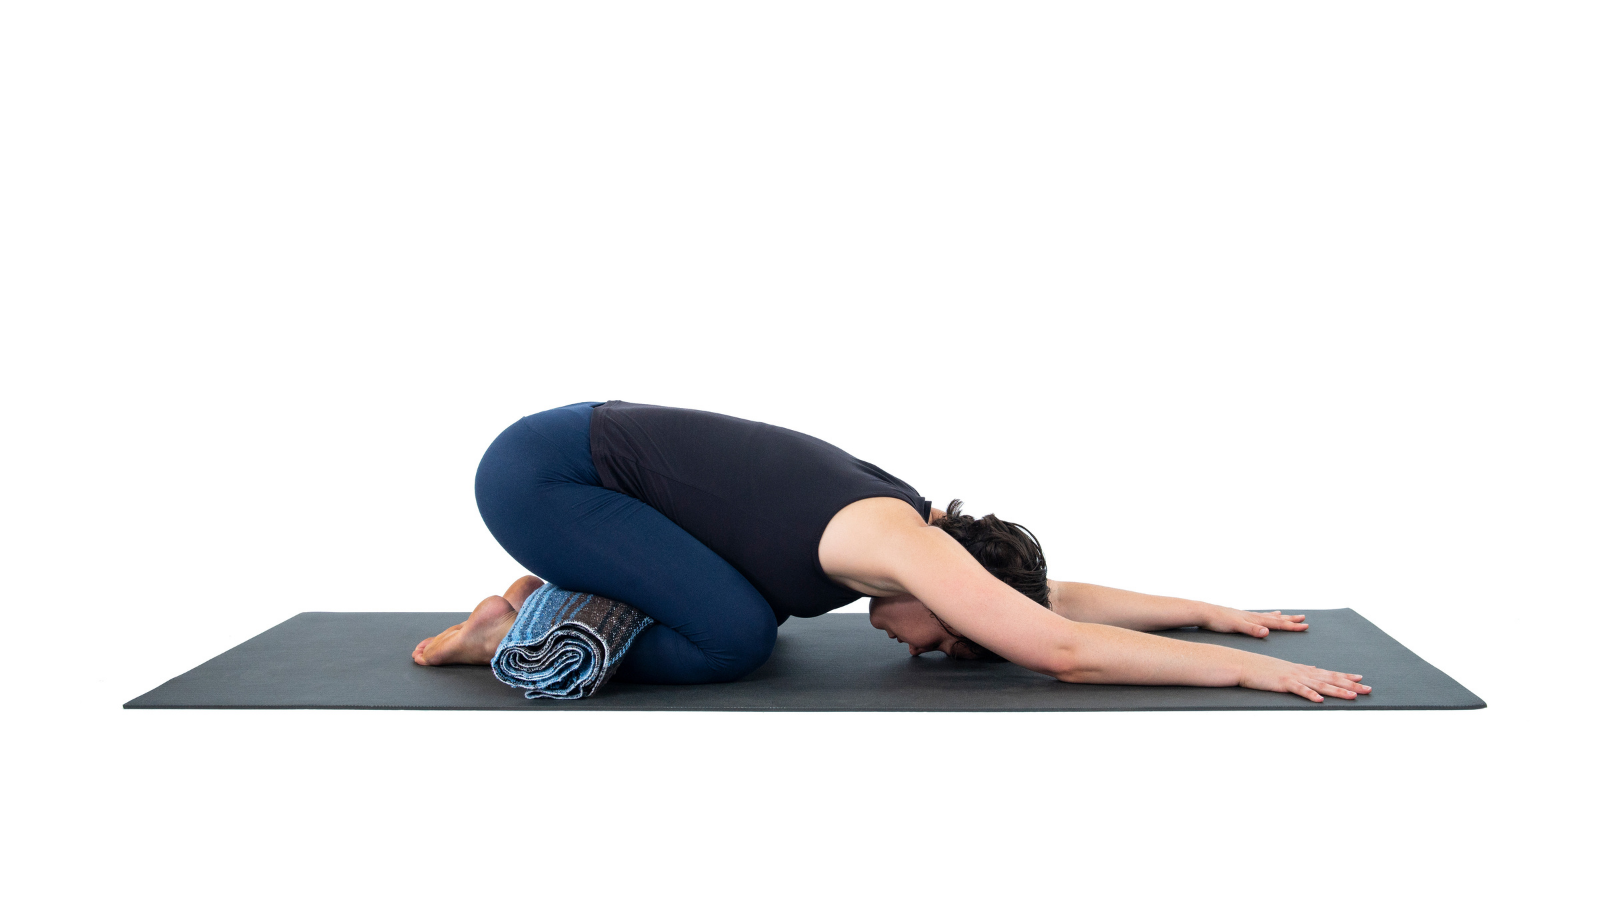 yoga for pelvic floor health: Child's pose or Balasana is a respite pose in most yoga sequences